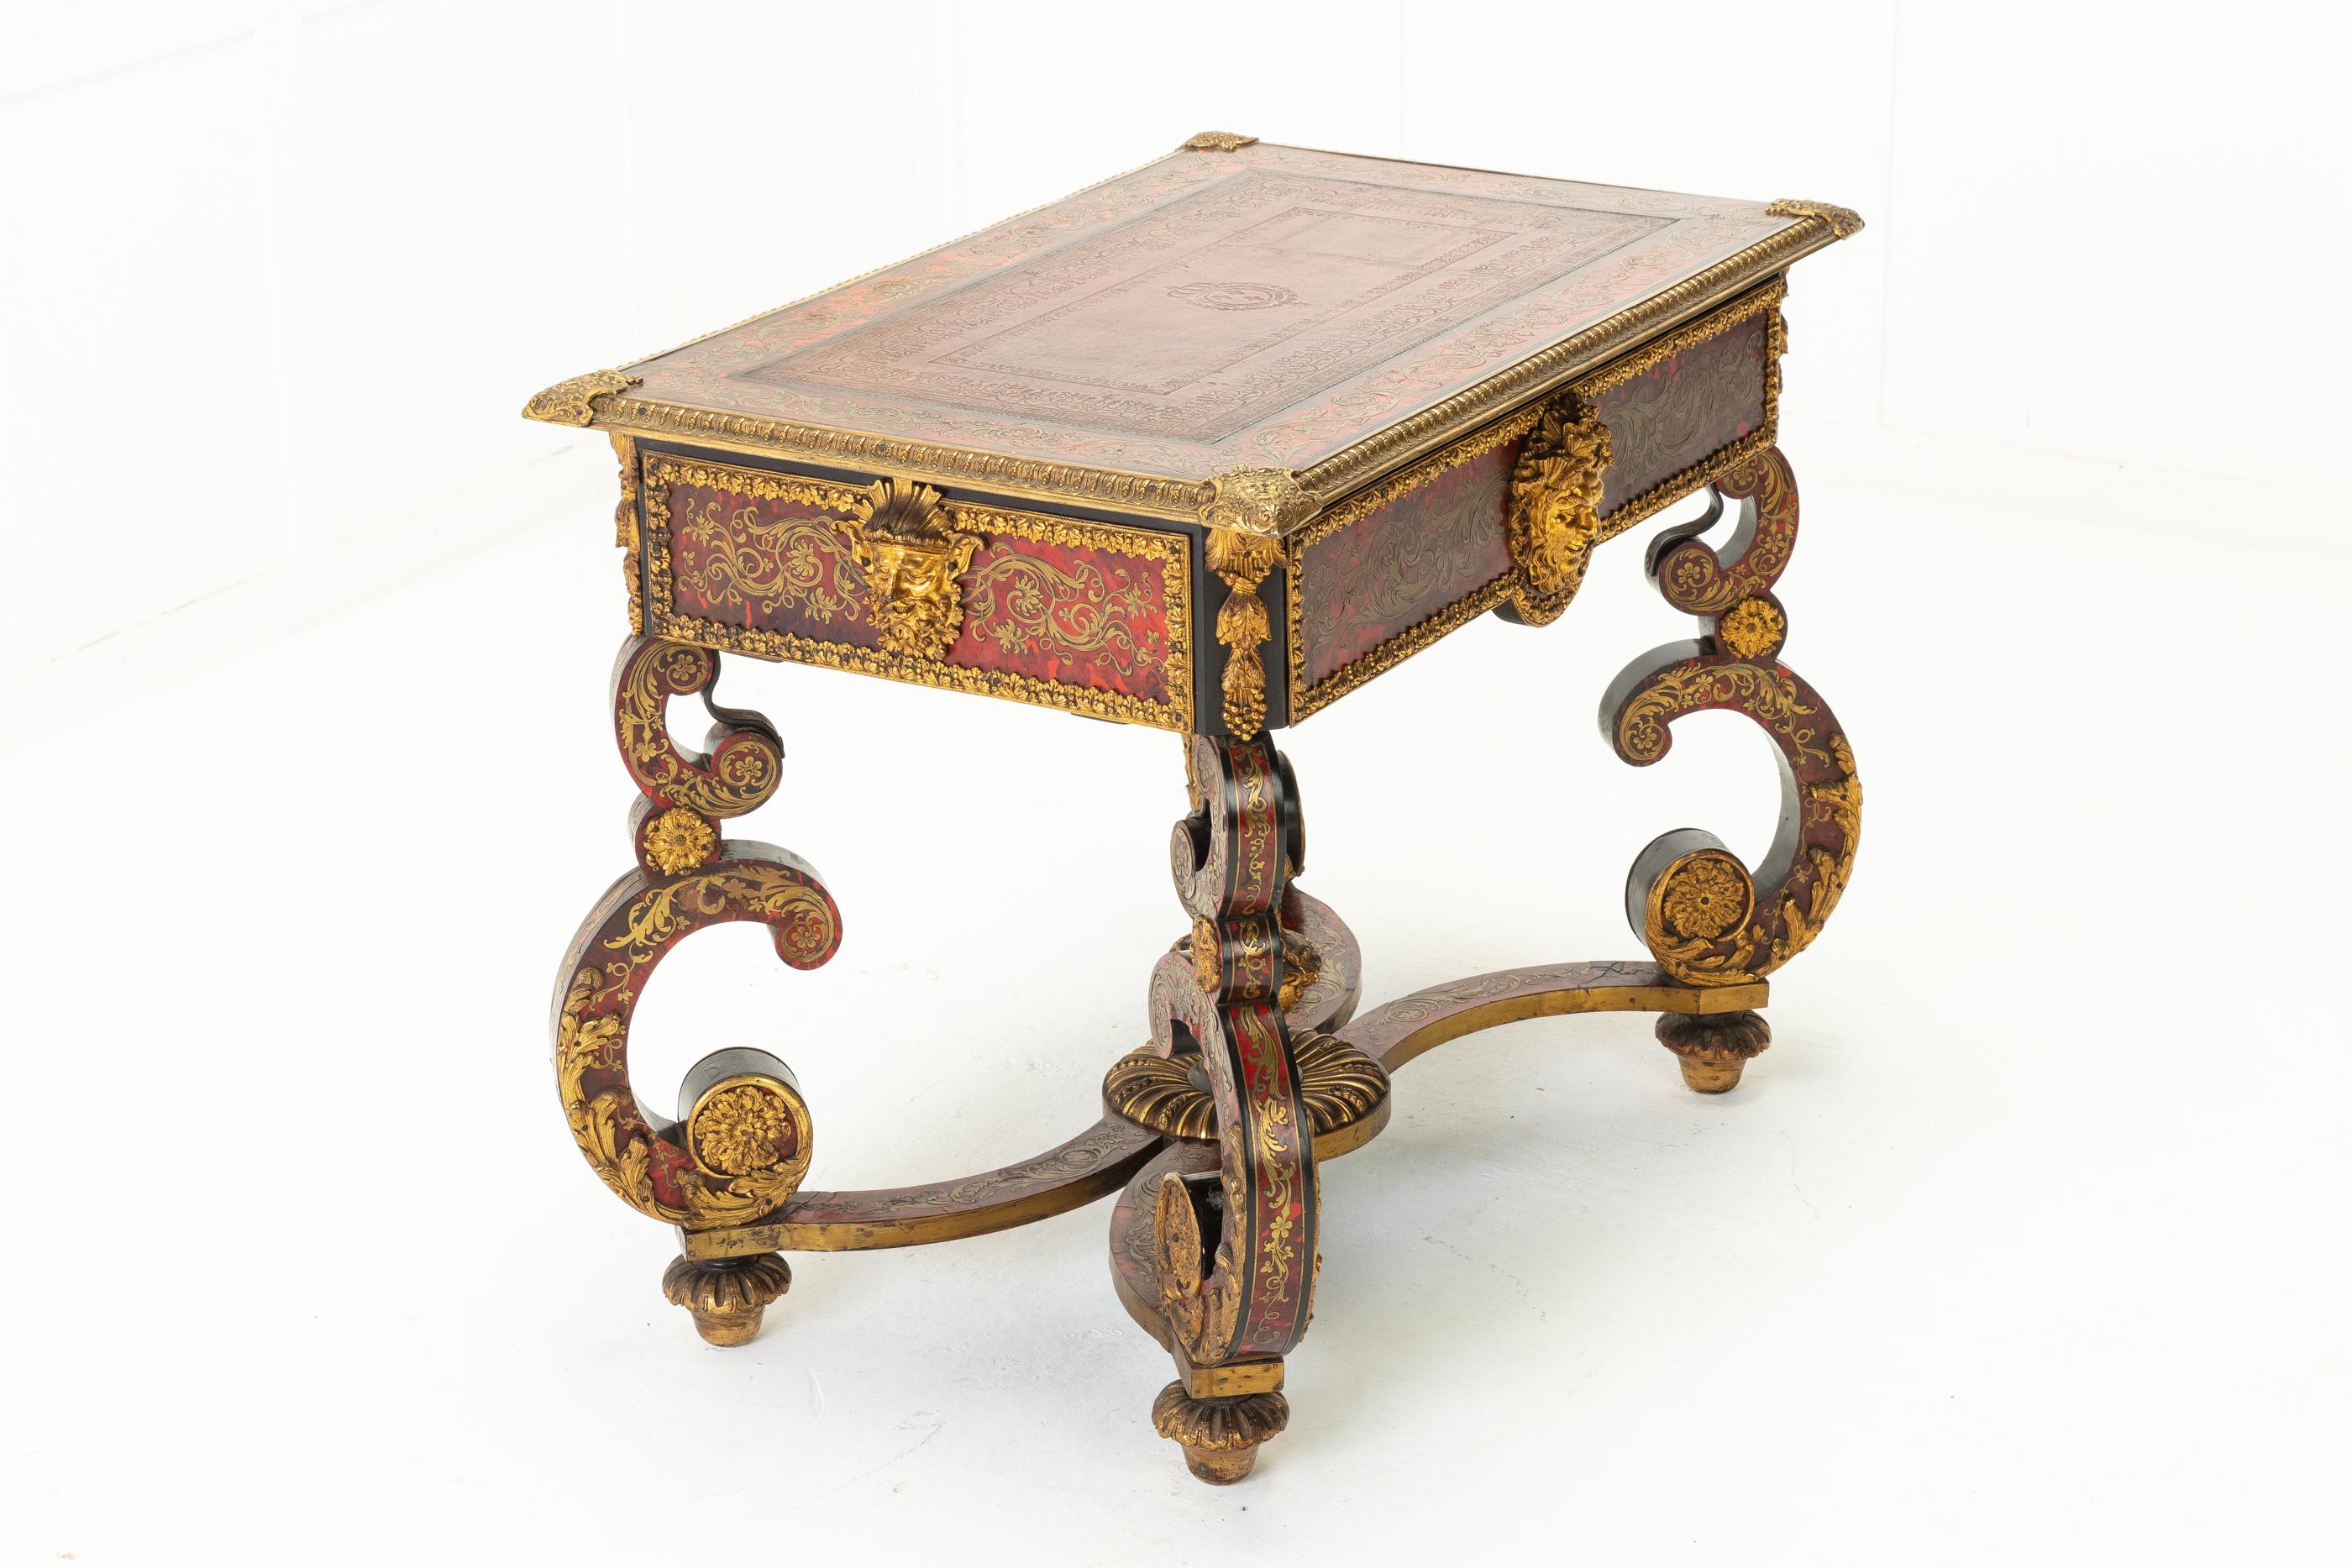 An exceptional 19th century French boulle bureau plat of outstanding quality. Having engraved brass and red tortoise shell, we feel this is an early 19th century table, possibly made to match an 18th century one.

Some of the finest boulle work